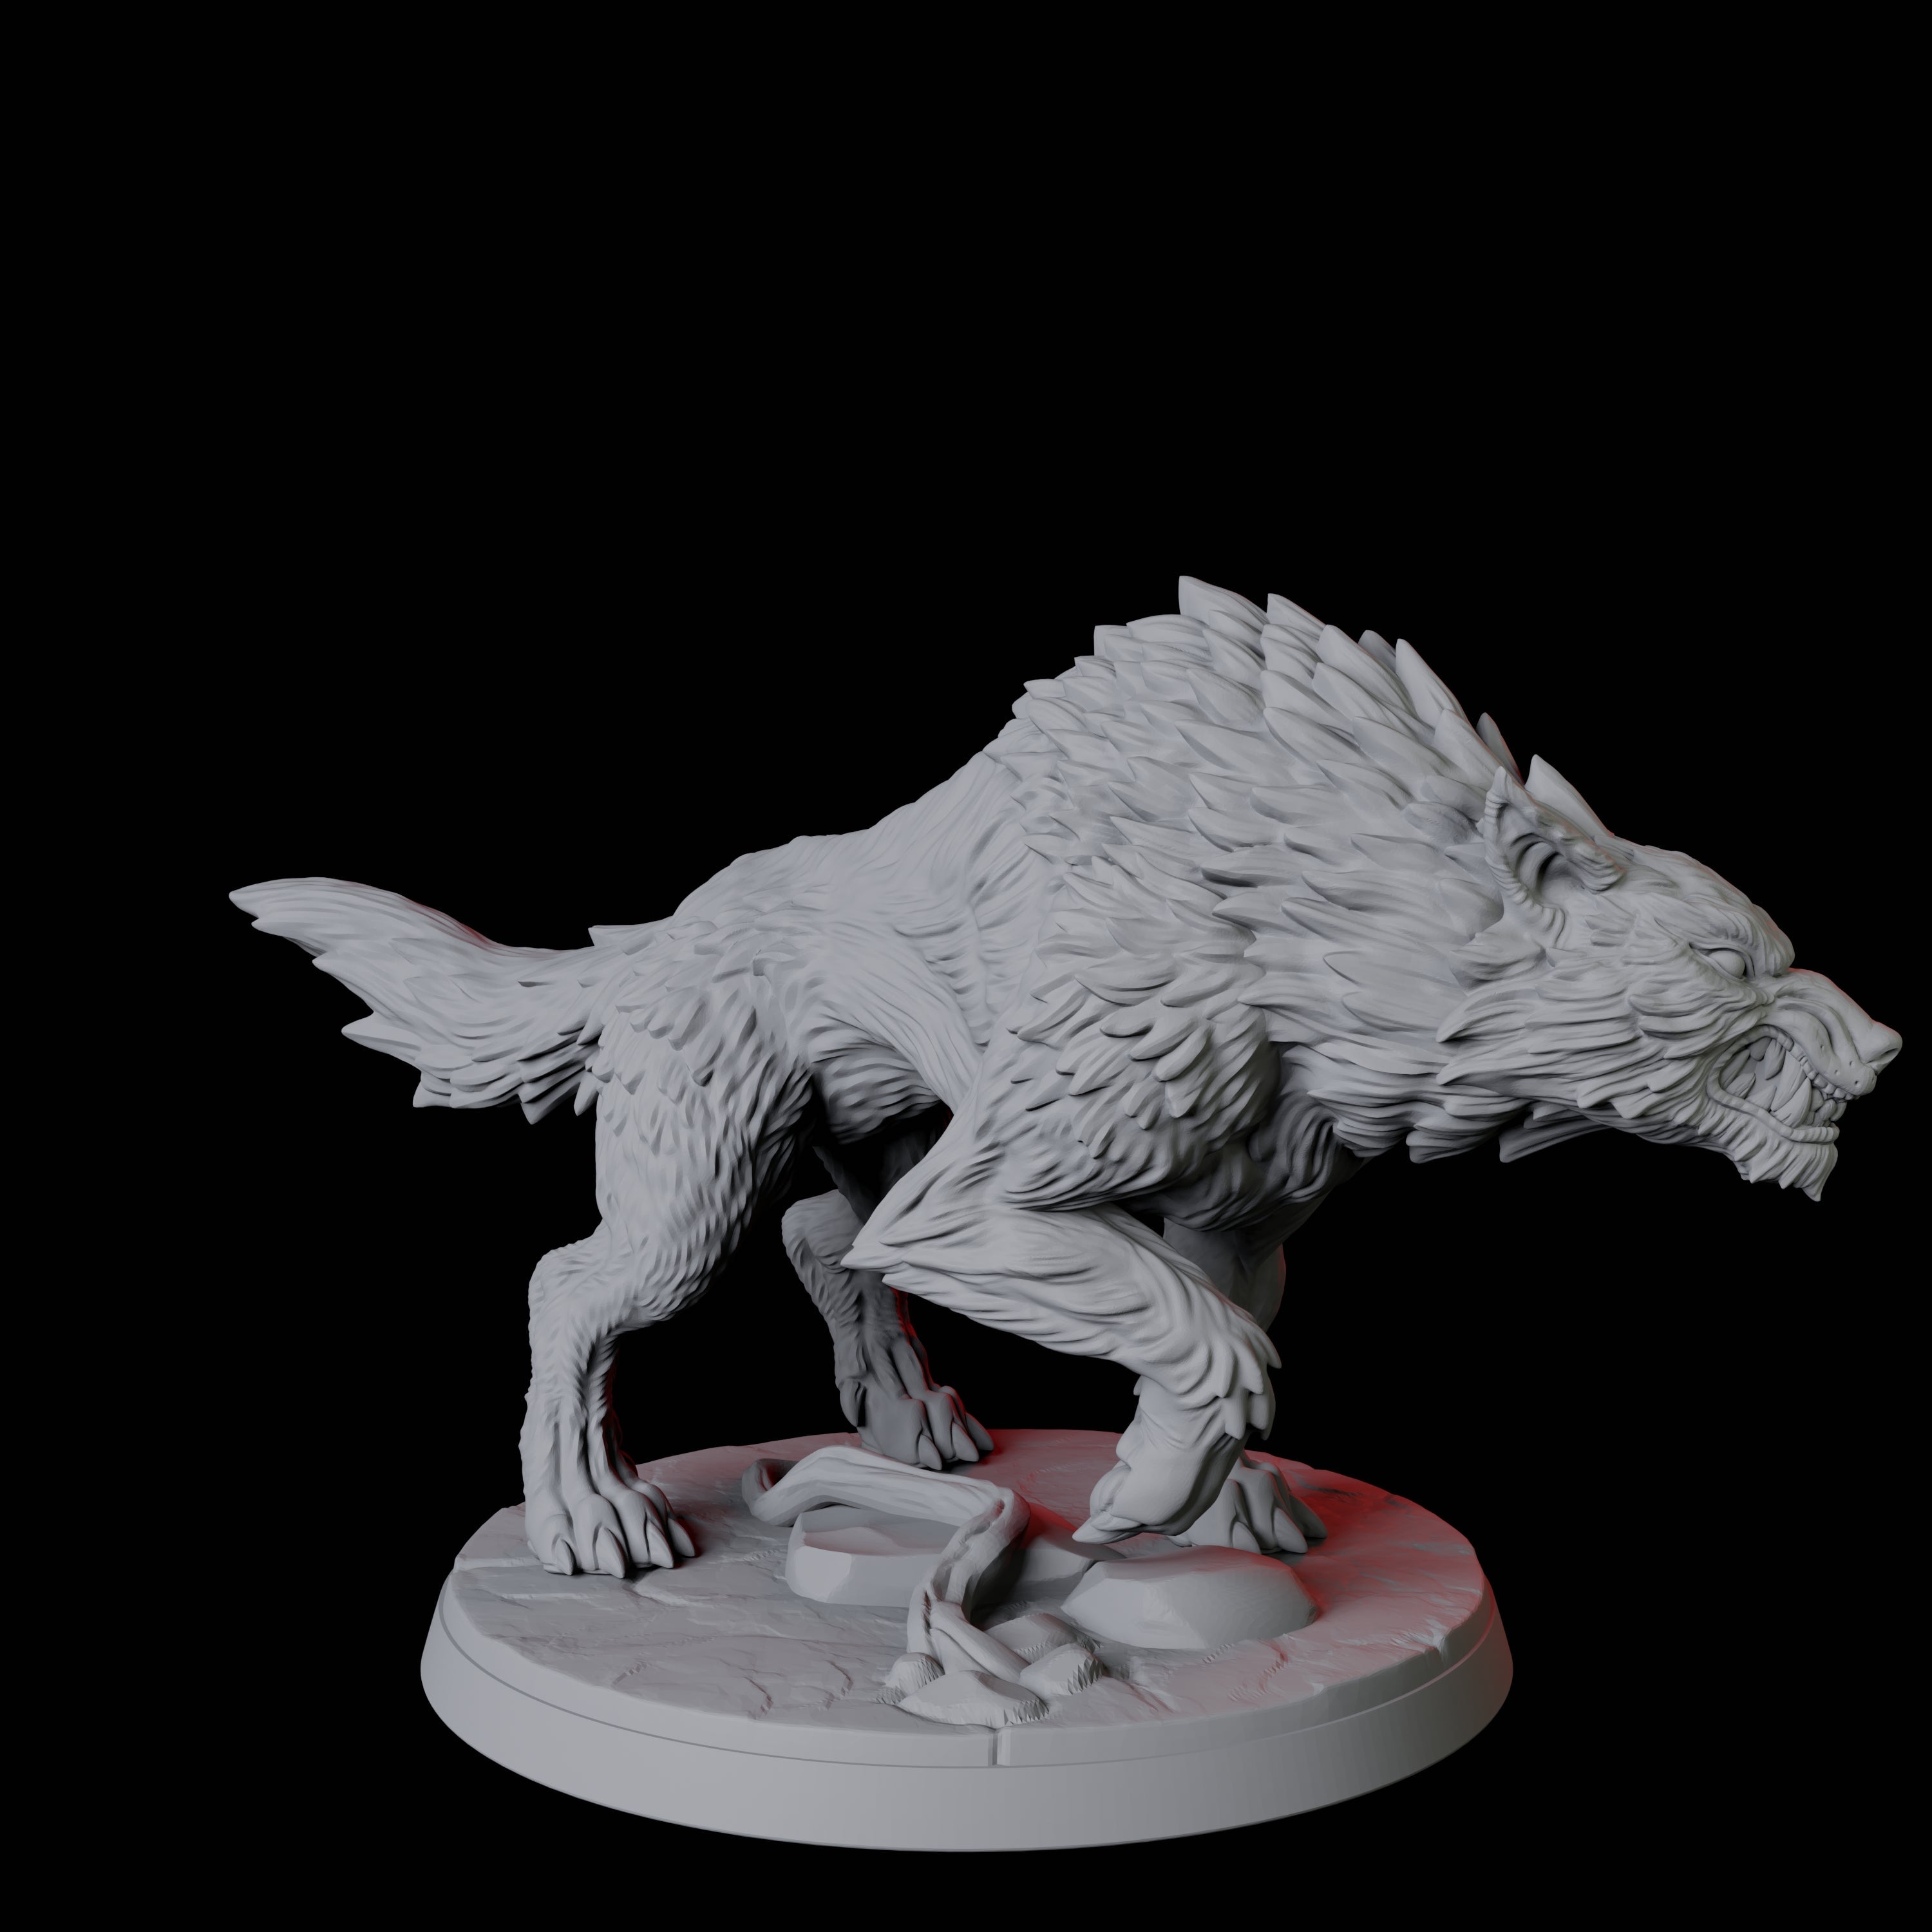 Stalking Wolf D Miniature for Dungeons and Dragons, Pathfinder or other TTRPGs